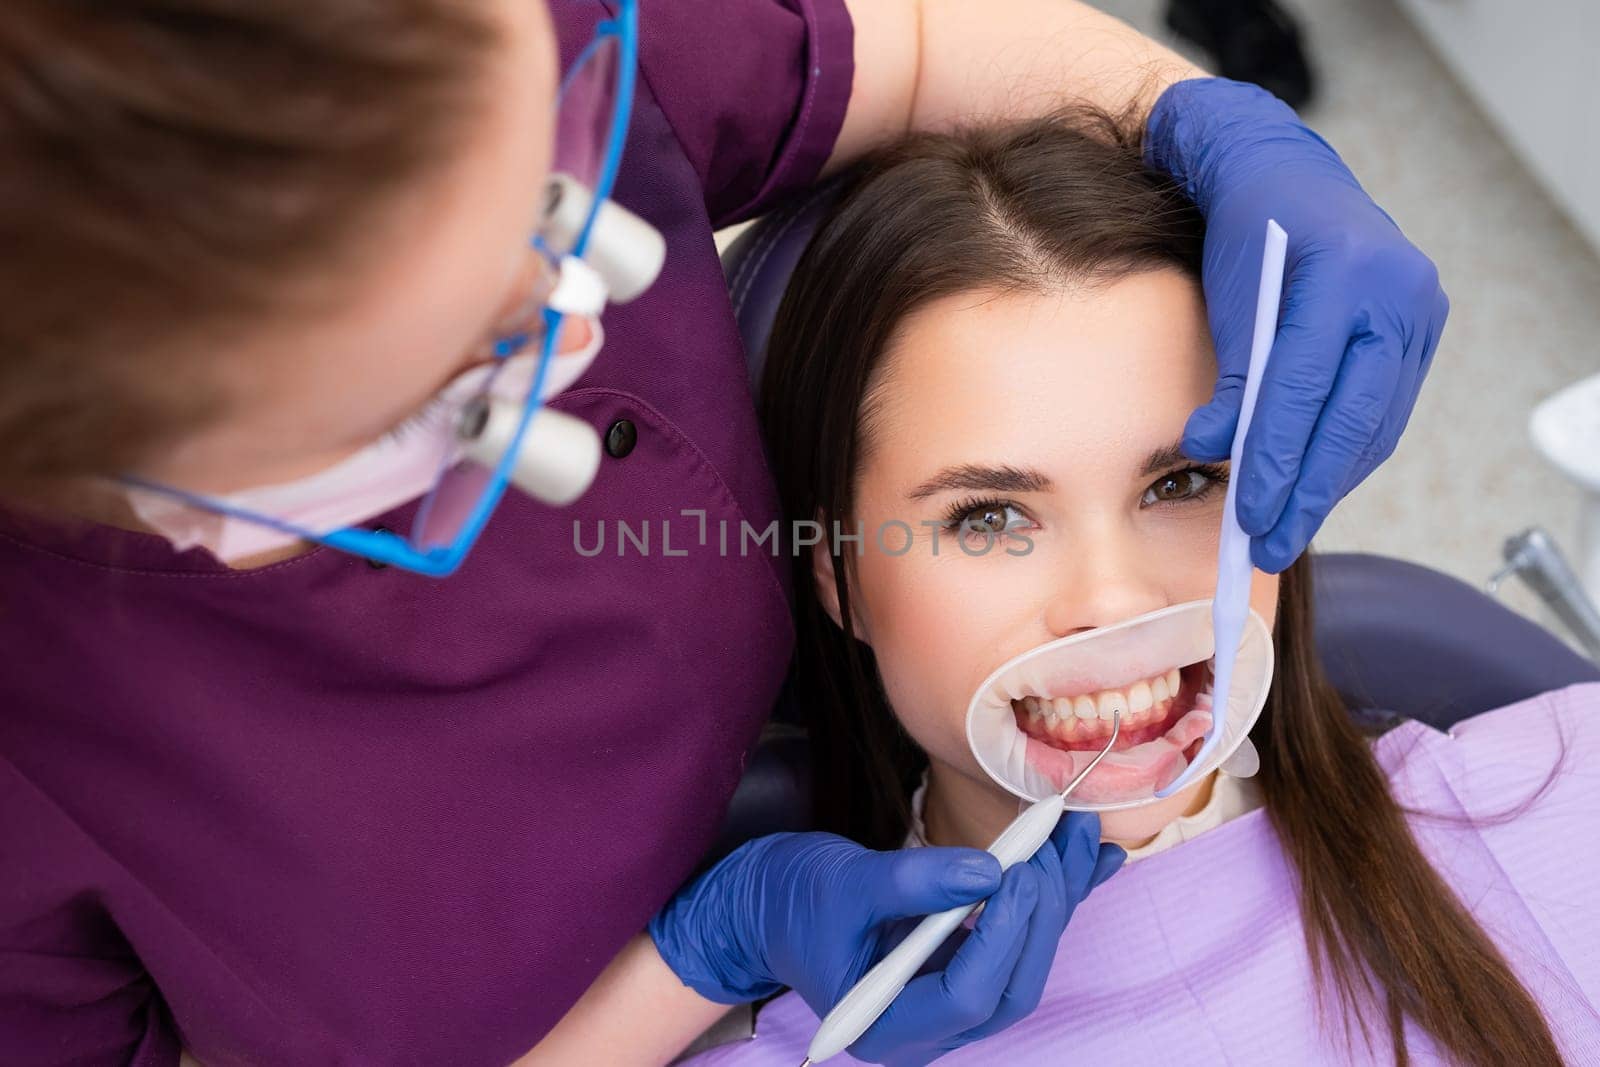 Dentist places temporary dental filling with instrument by vladimka